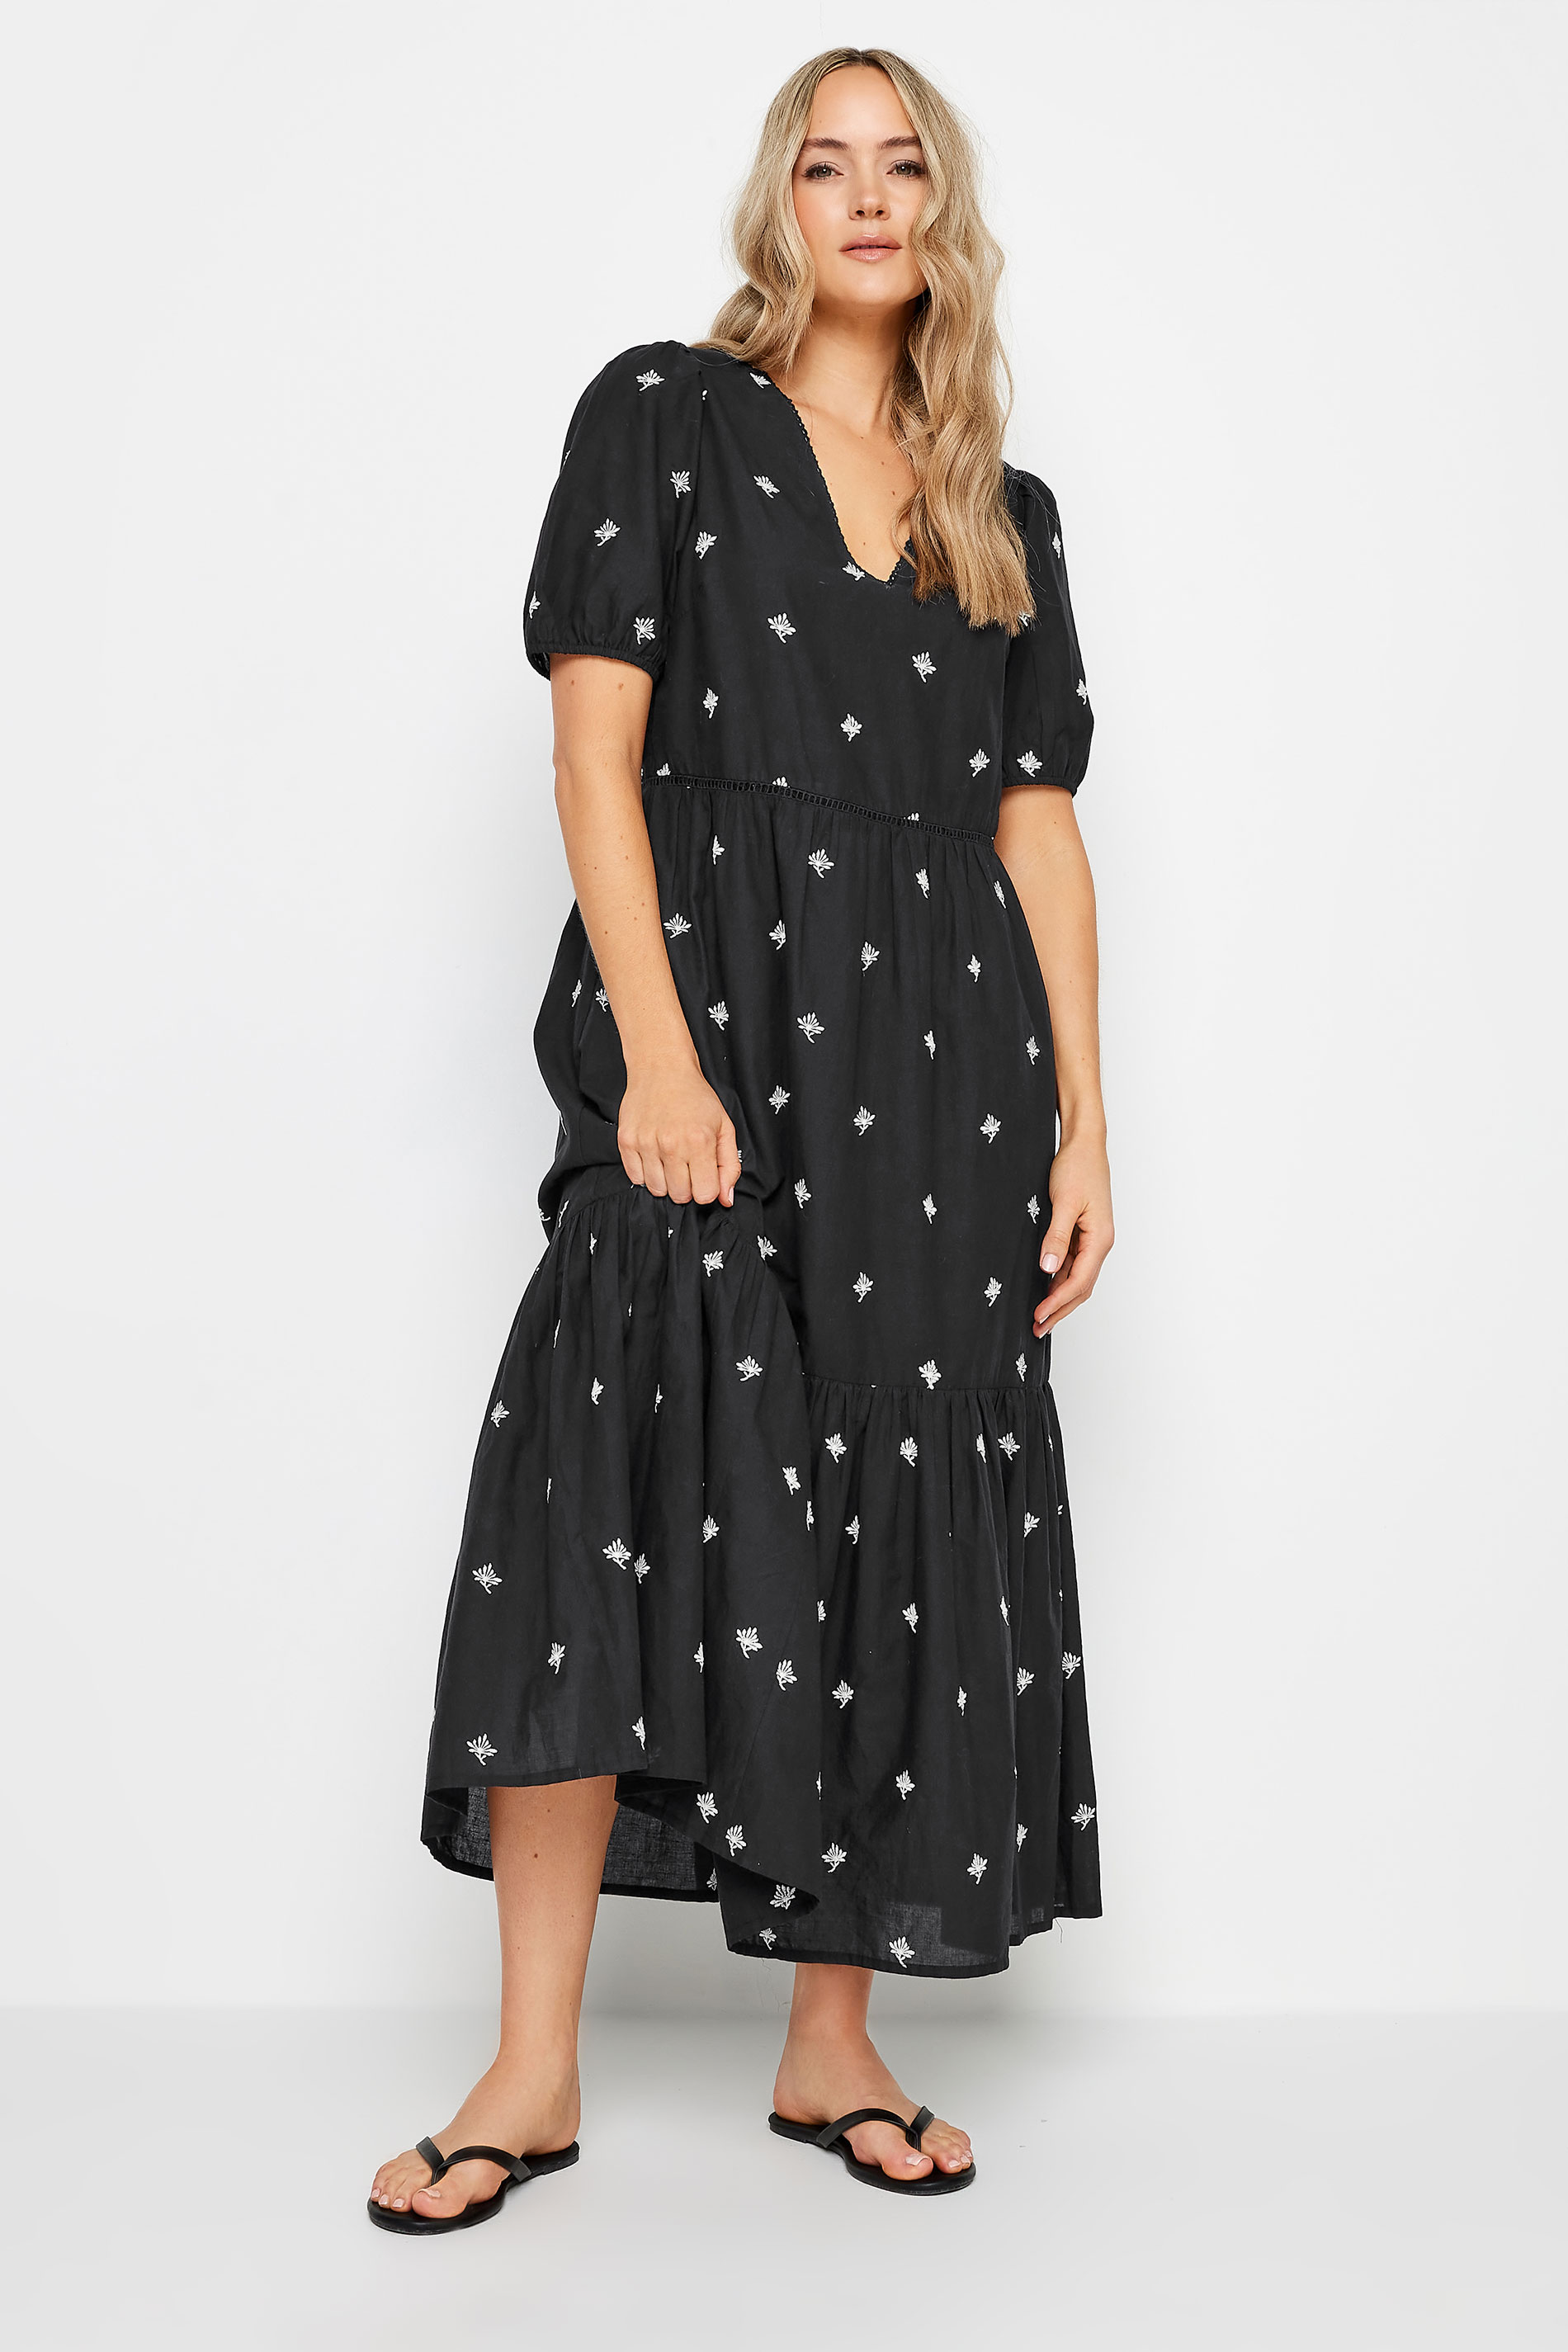 LTS Tall Women's Black Embroidered Tiered Maxi Dress | Long Tall Sally 2